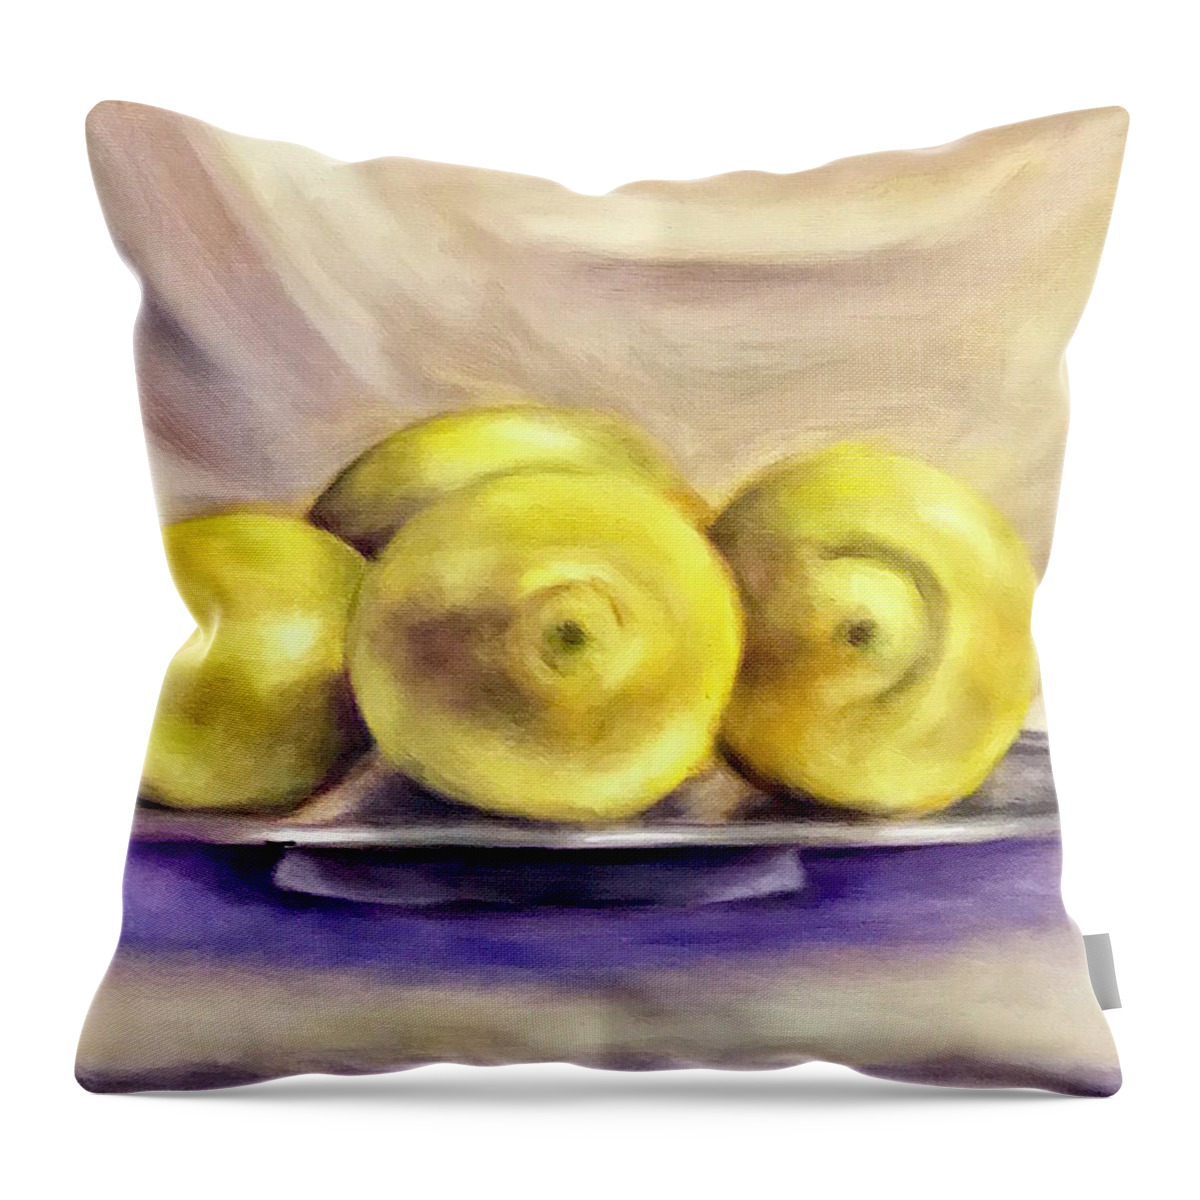 Lemon Throw Pillow featuring the painting Lemon Drops by Dr Pat Gehr